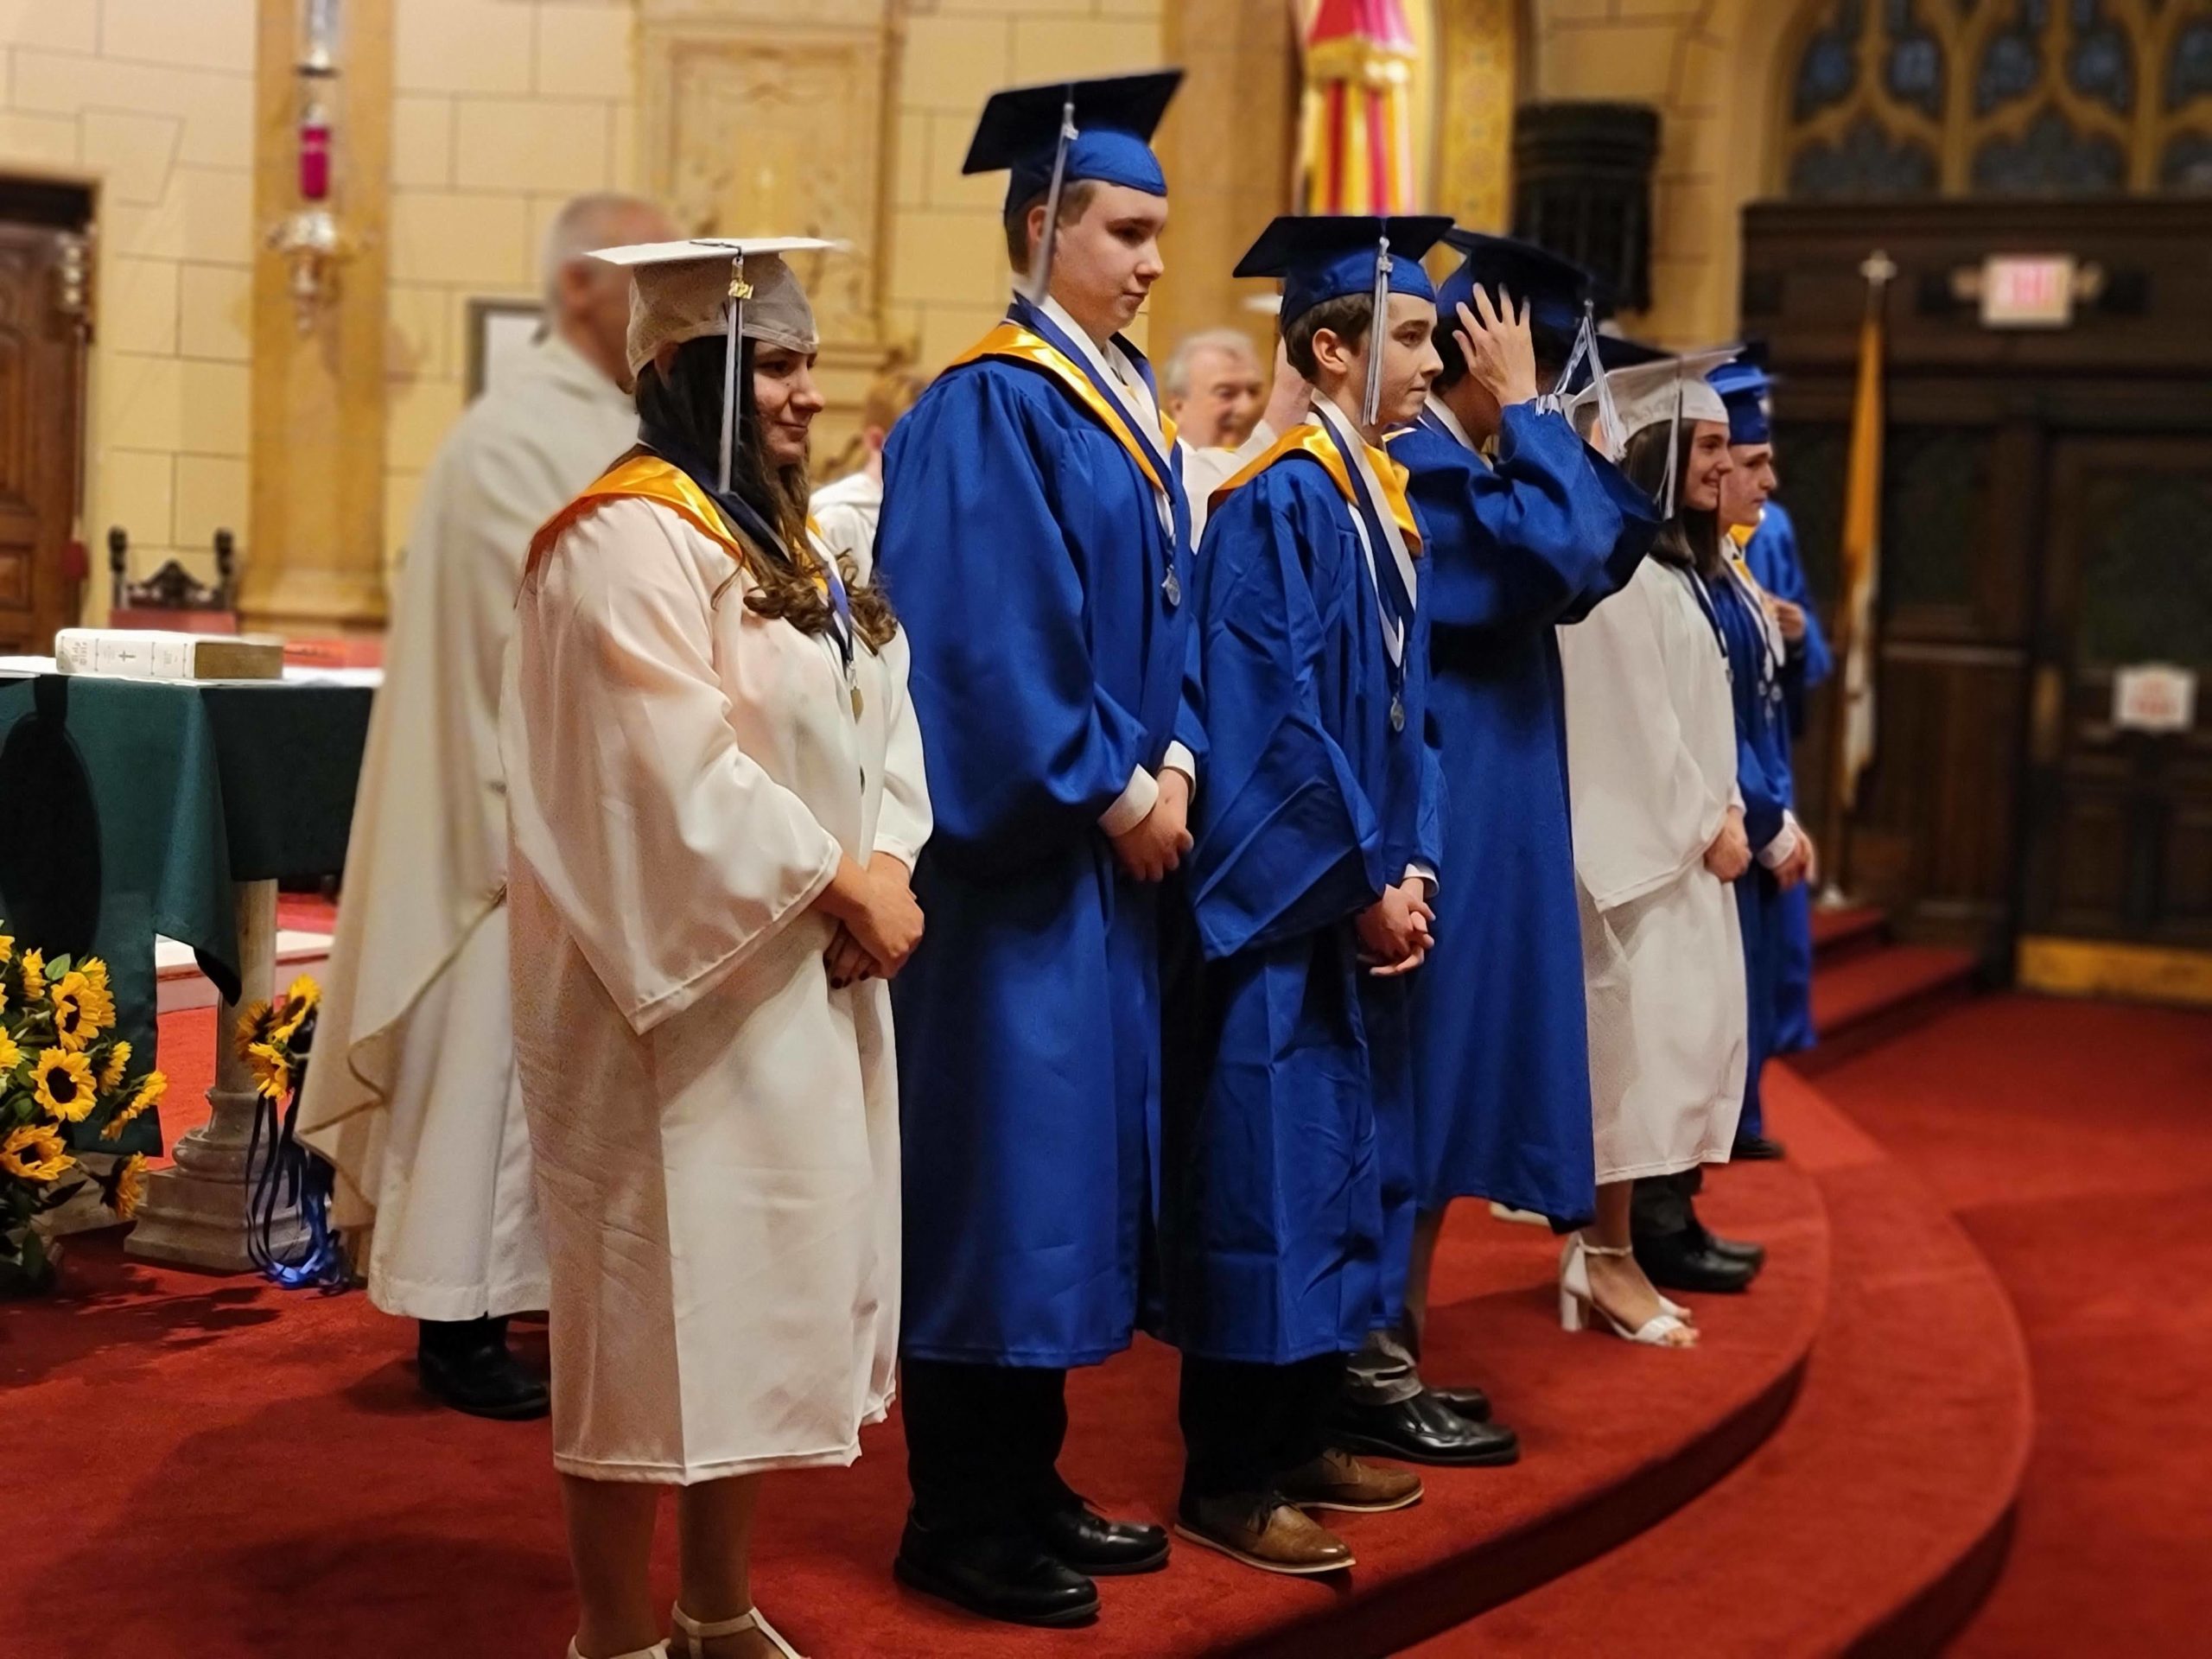 Ten students were cited for achieving High Honors during the Our Lady of the Hamptons commencement ceremony on June 11.